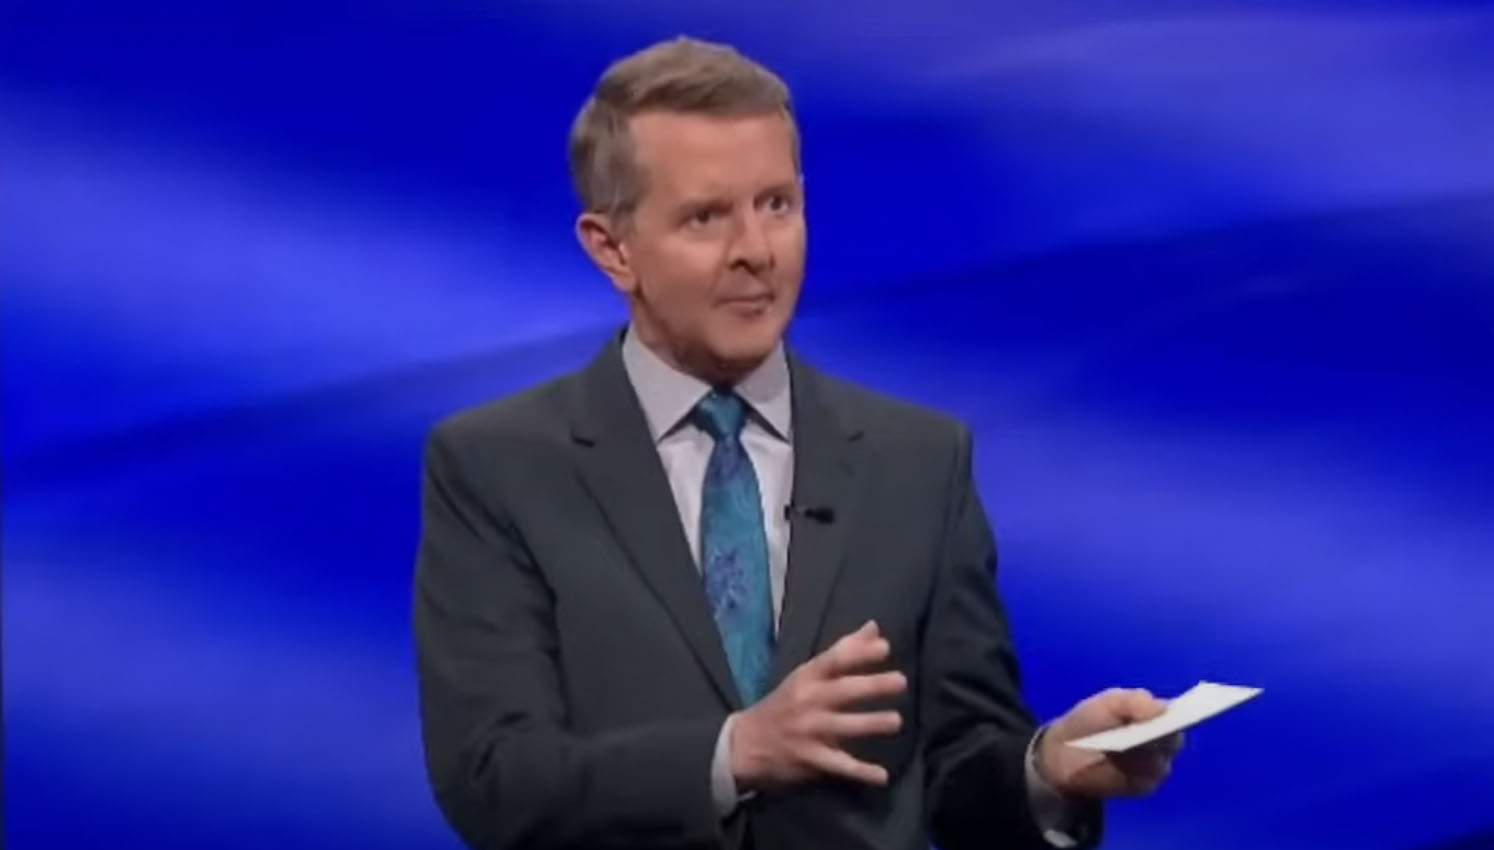 Jeopardy! host Ken Jennings admitted that his kids don't like Gen Z terminology being used on the show